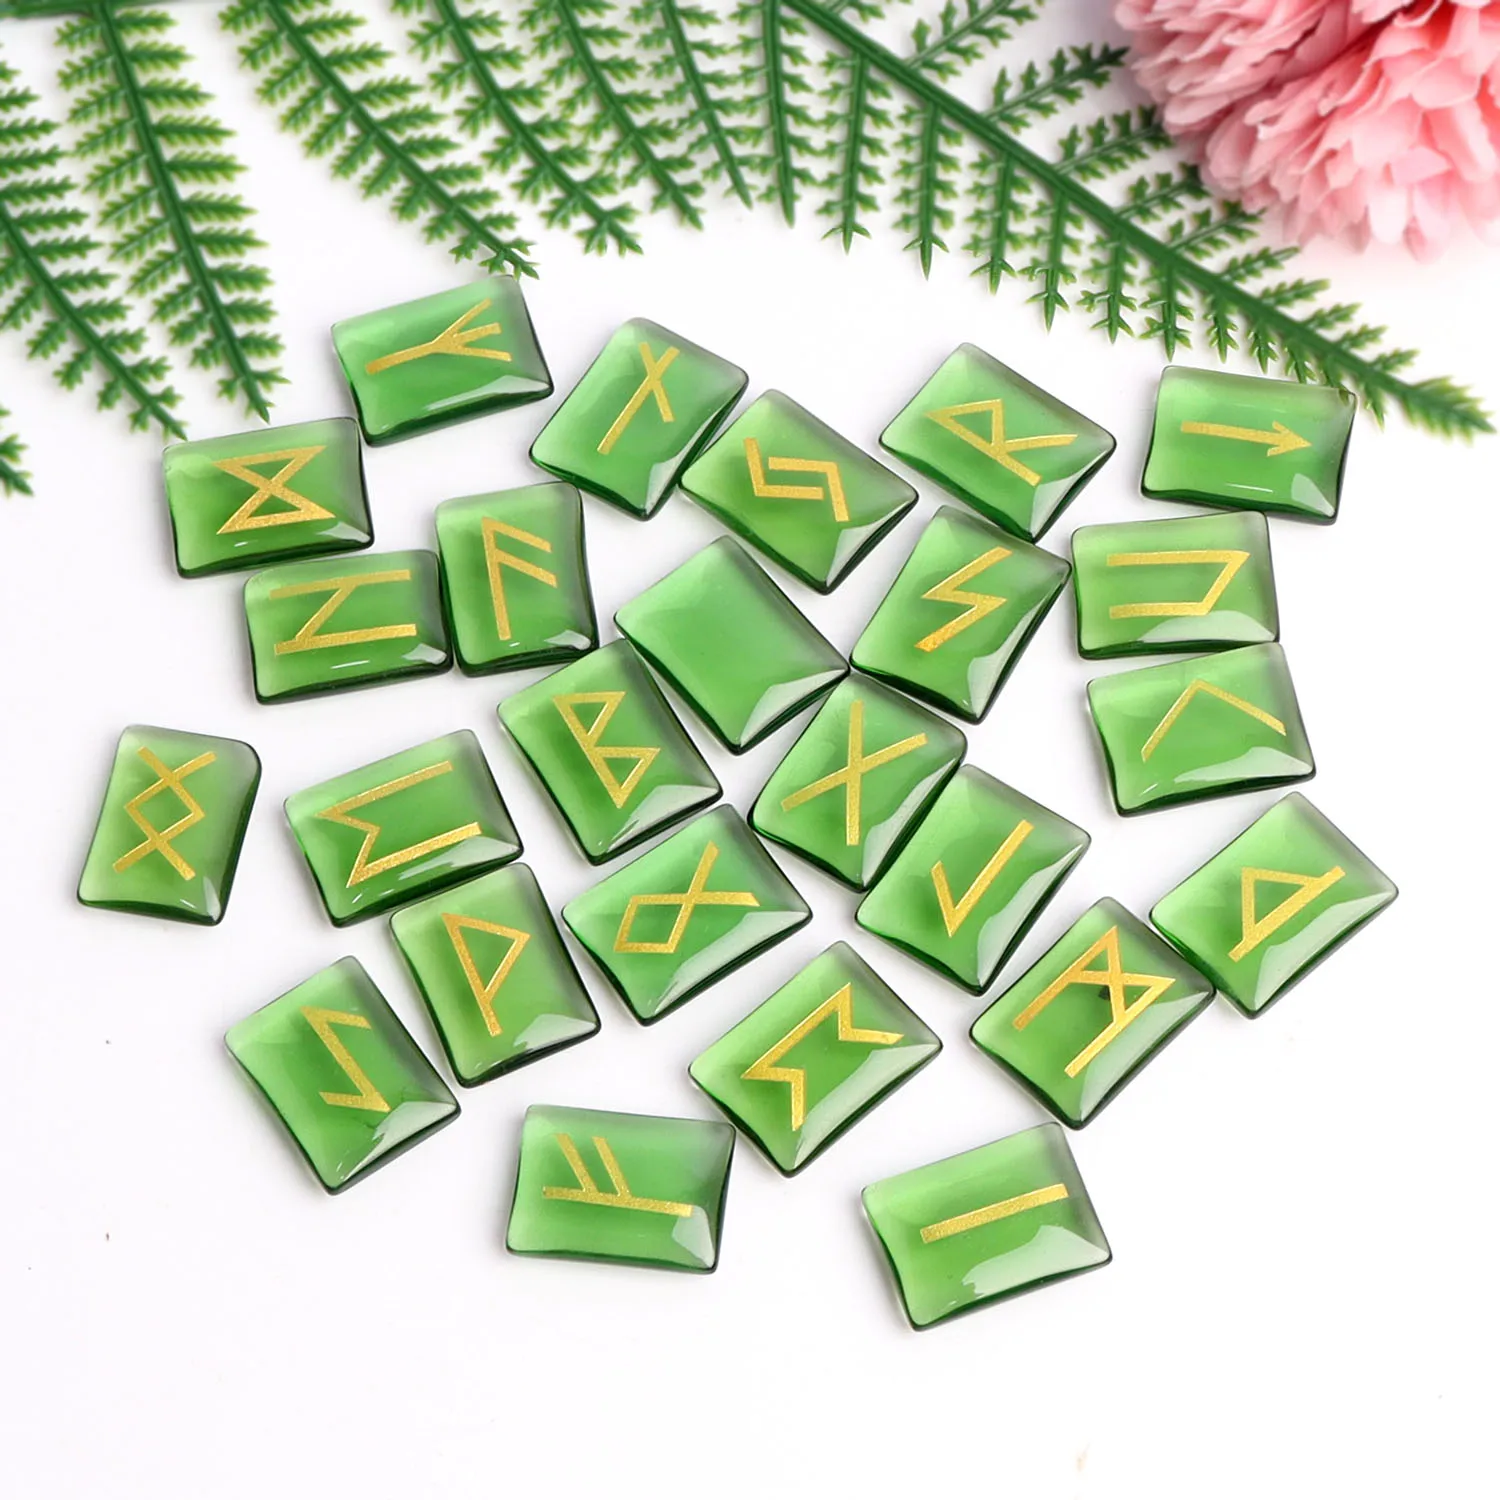 

25pcs Glass Rune Symbols Stone Carved Divination Mineral Meditation Healing Fortune-telling Reiki Collection Home Decor Gift